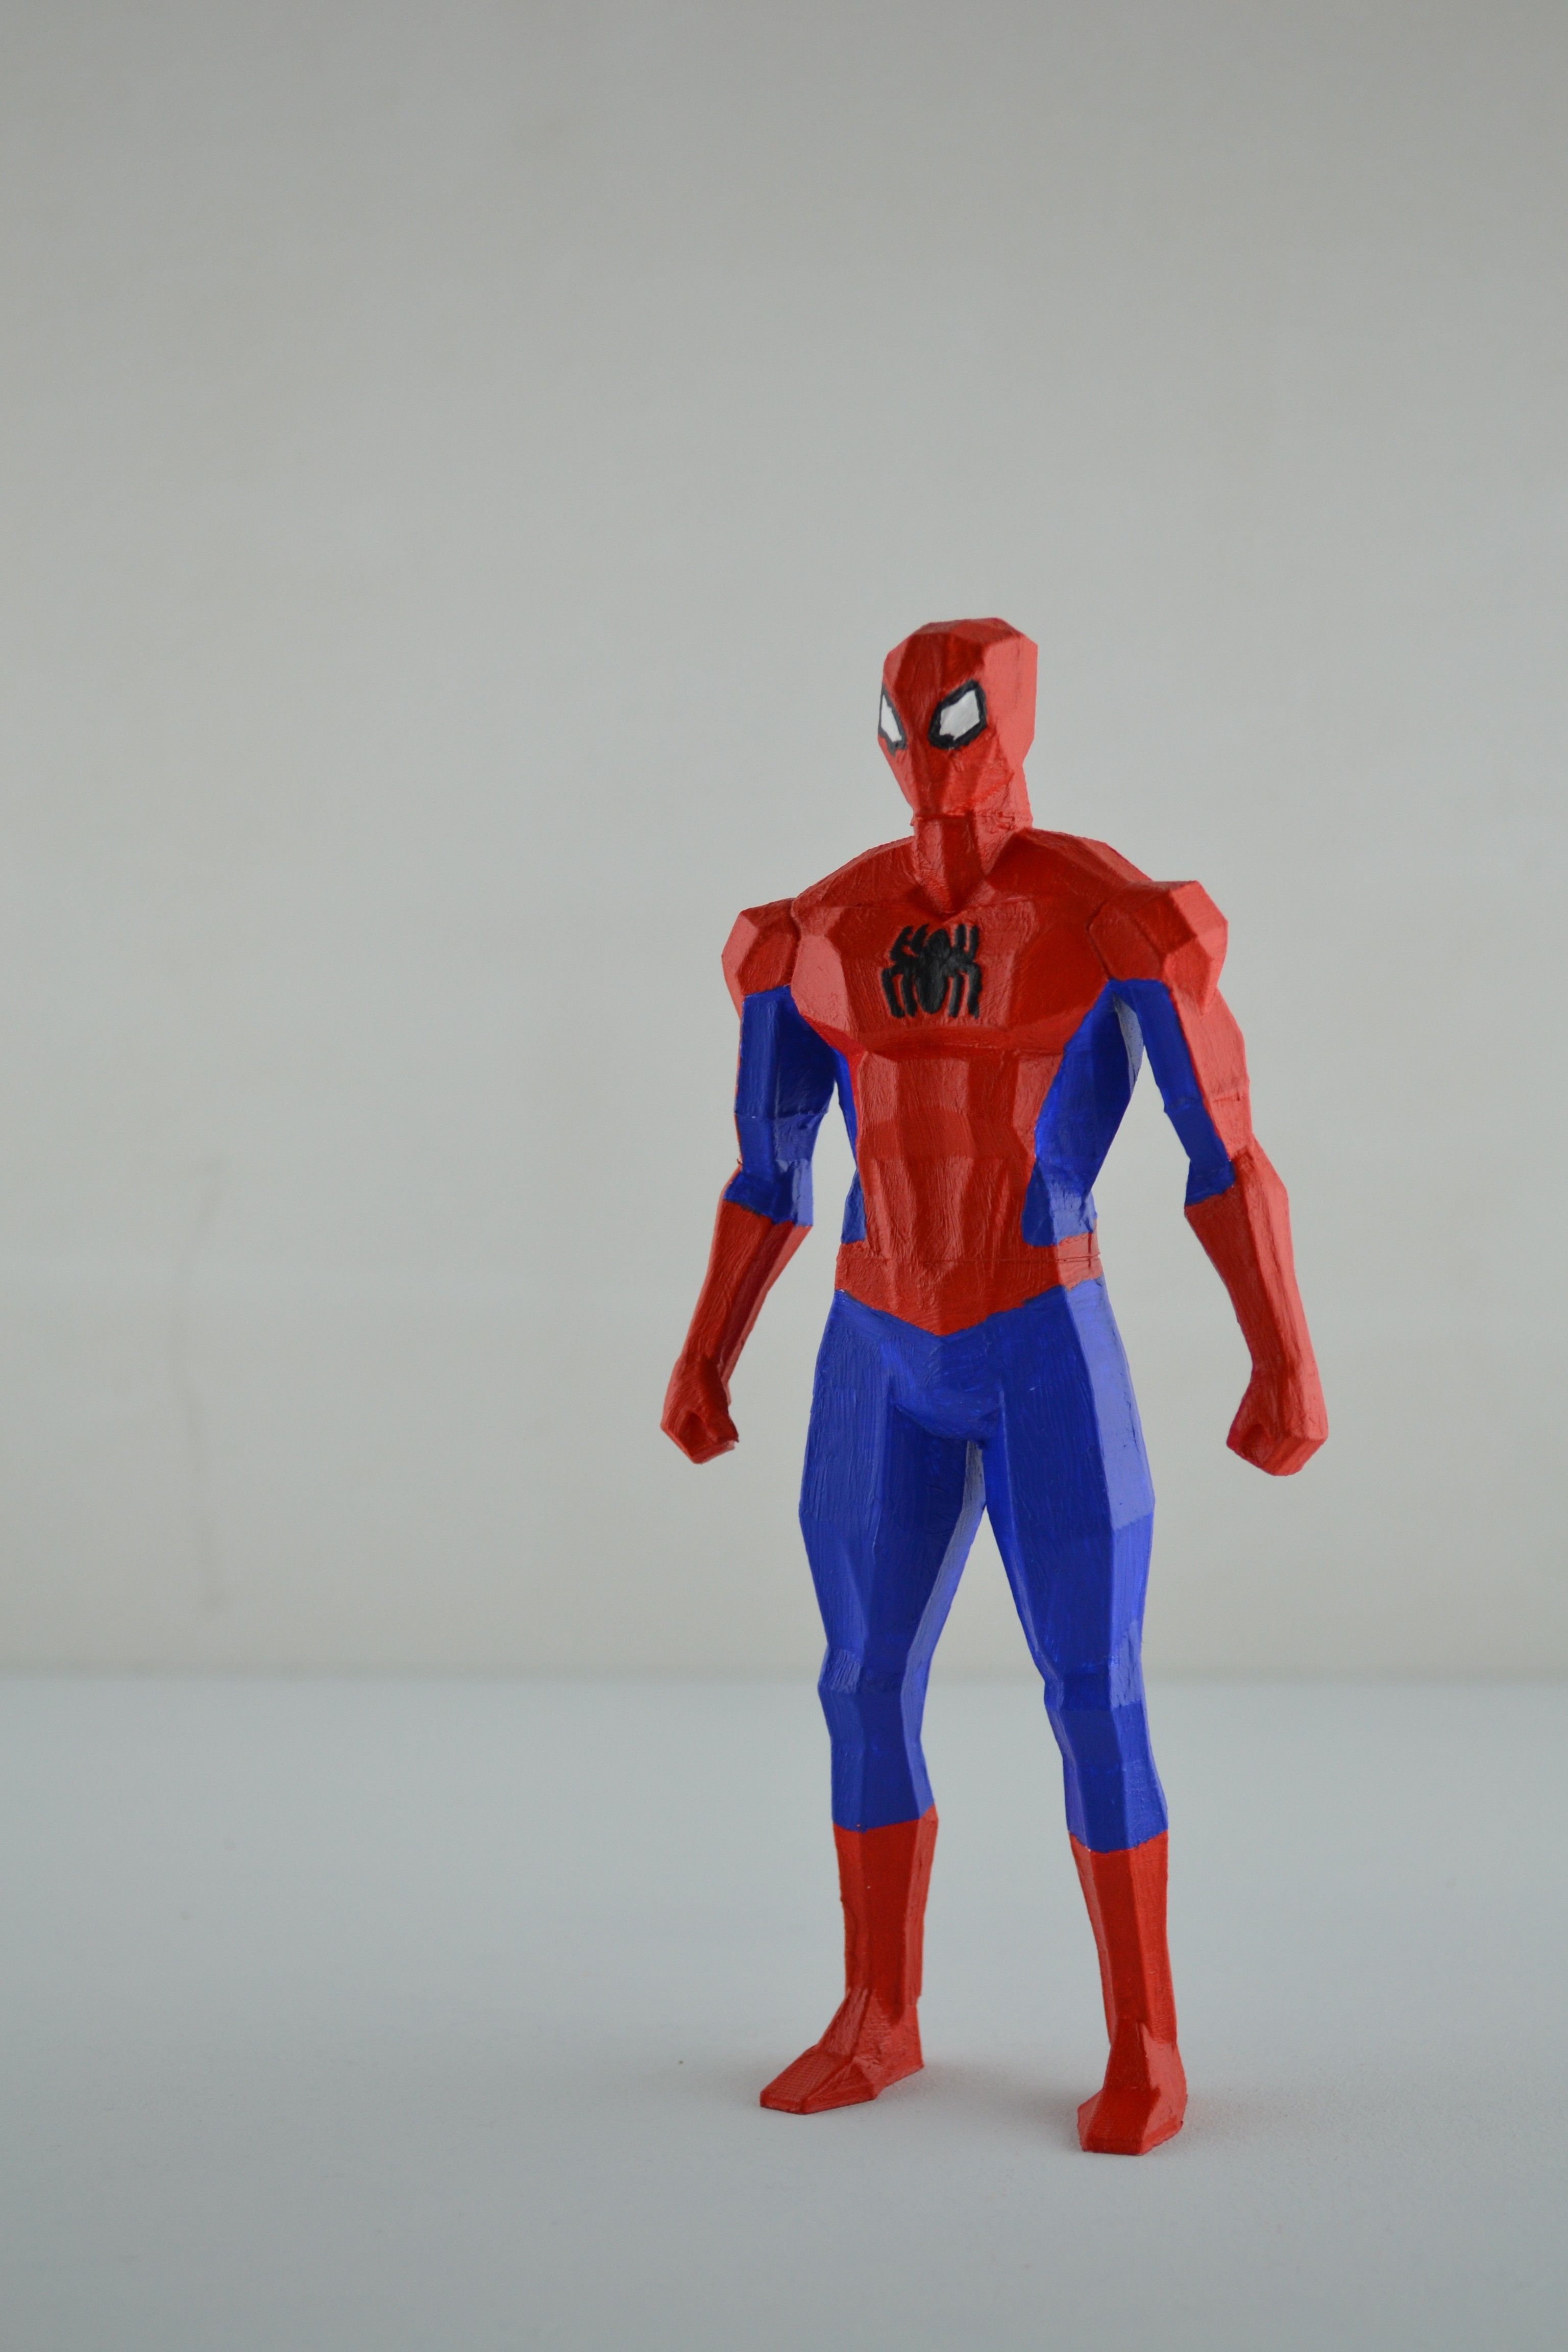 Low Poly Spider-Man, Creaxxis